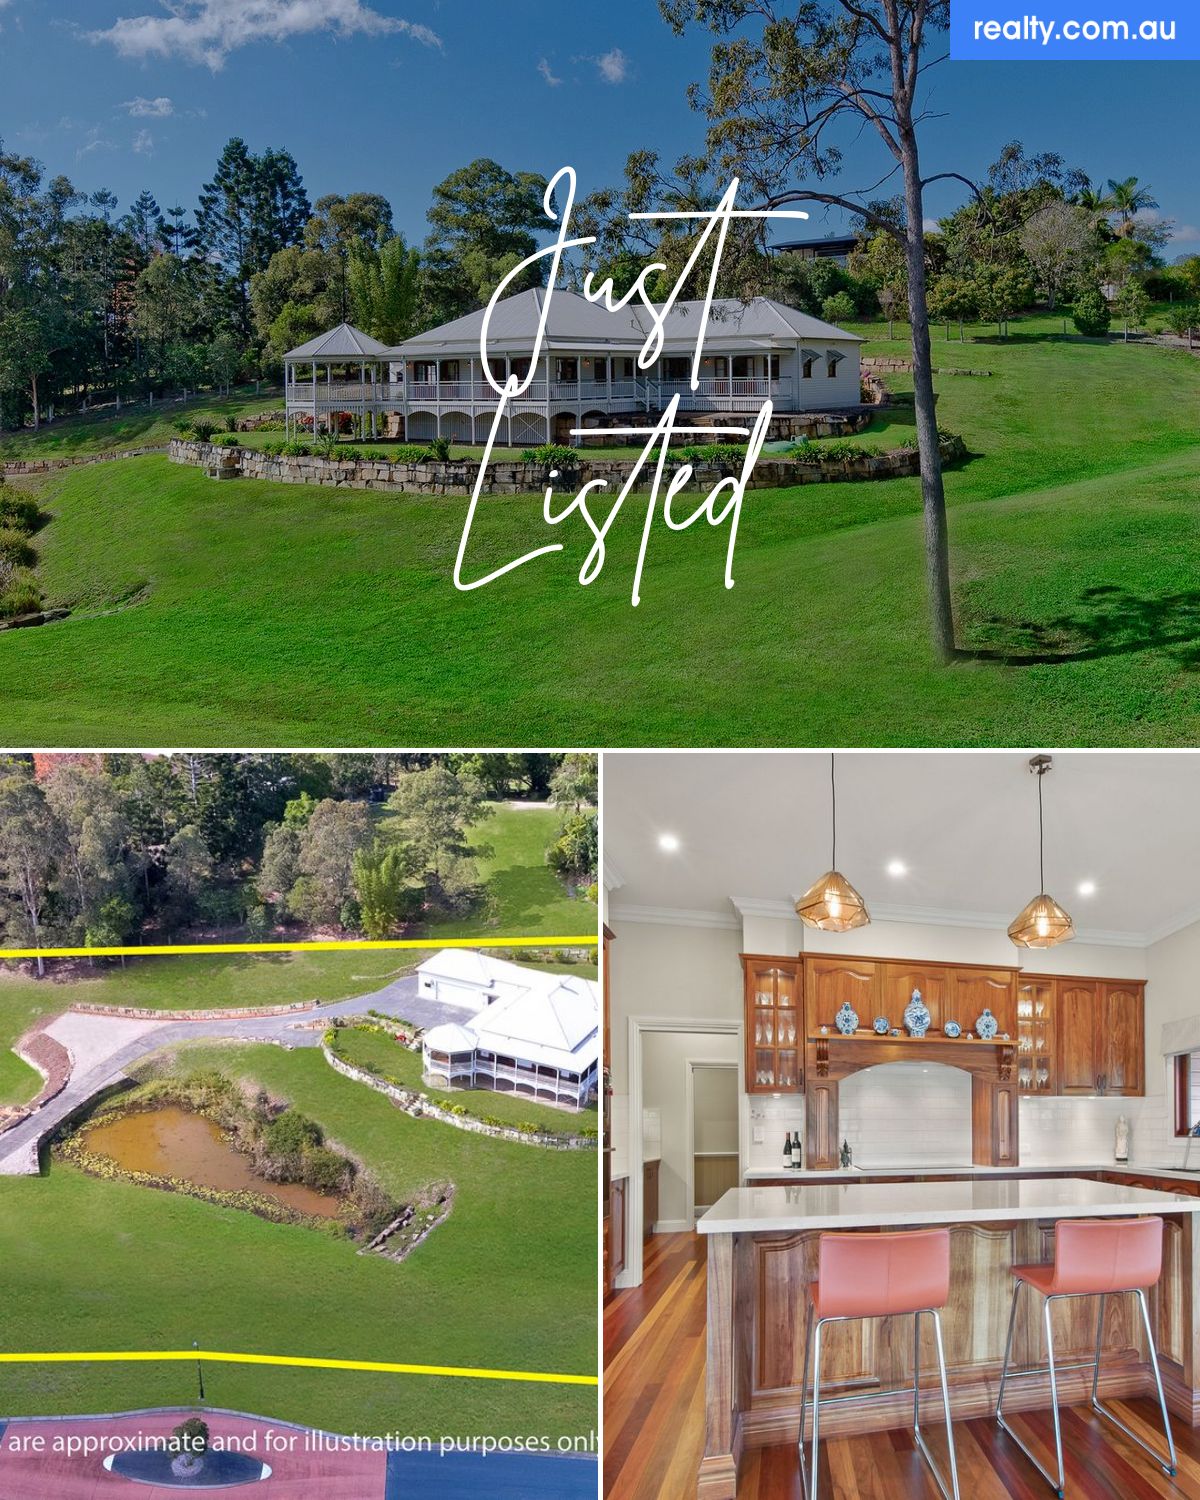 26 Currell Circuit, Samford Valley, QLD 4520 | Realty.com.au